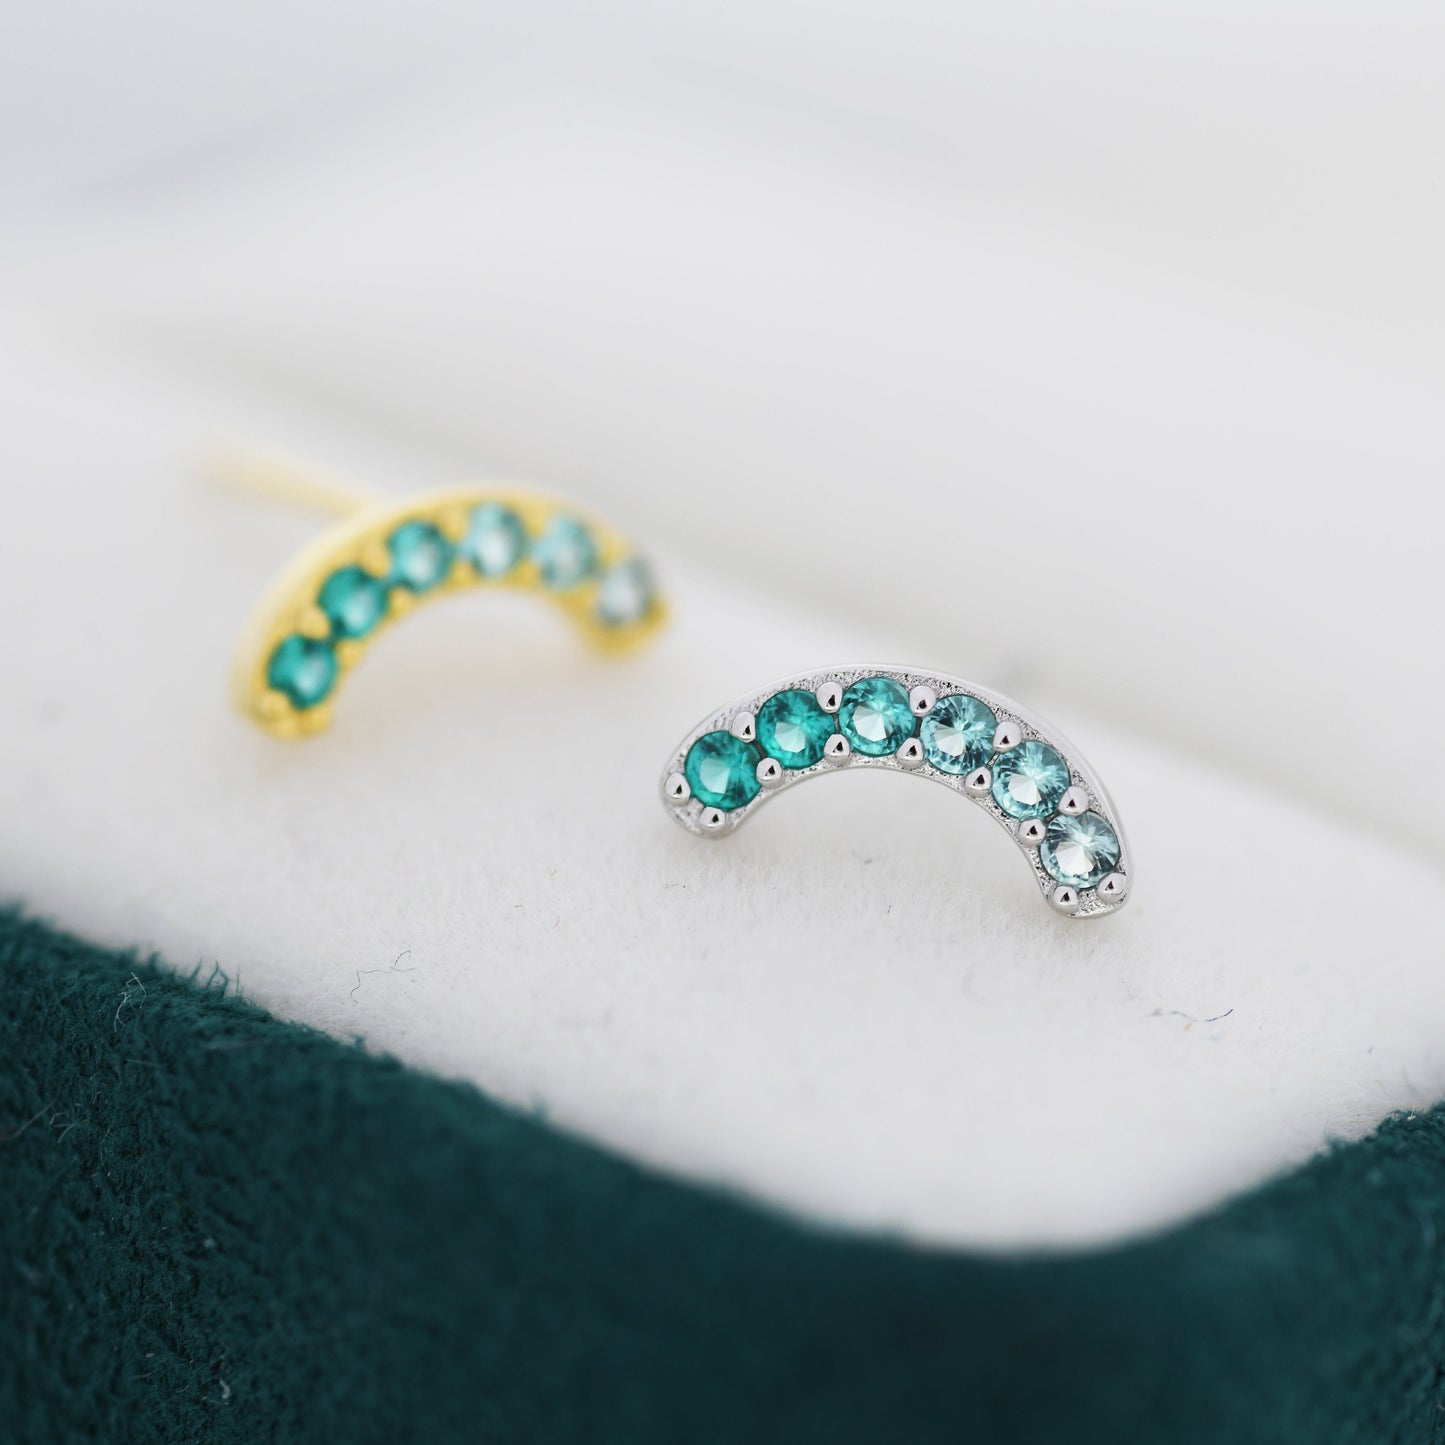 Ombre Emerald Green CZ Curved Bar Stud Earrings in Sterling Silver, Silver or Gold, Gradient Green Rainbow Earrings,  Stacking Earrings